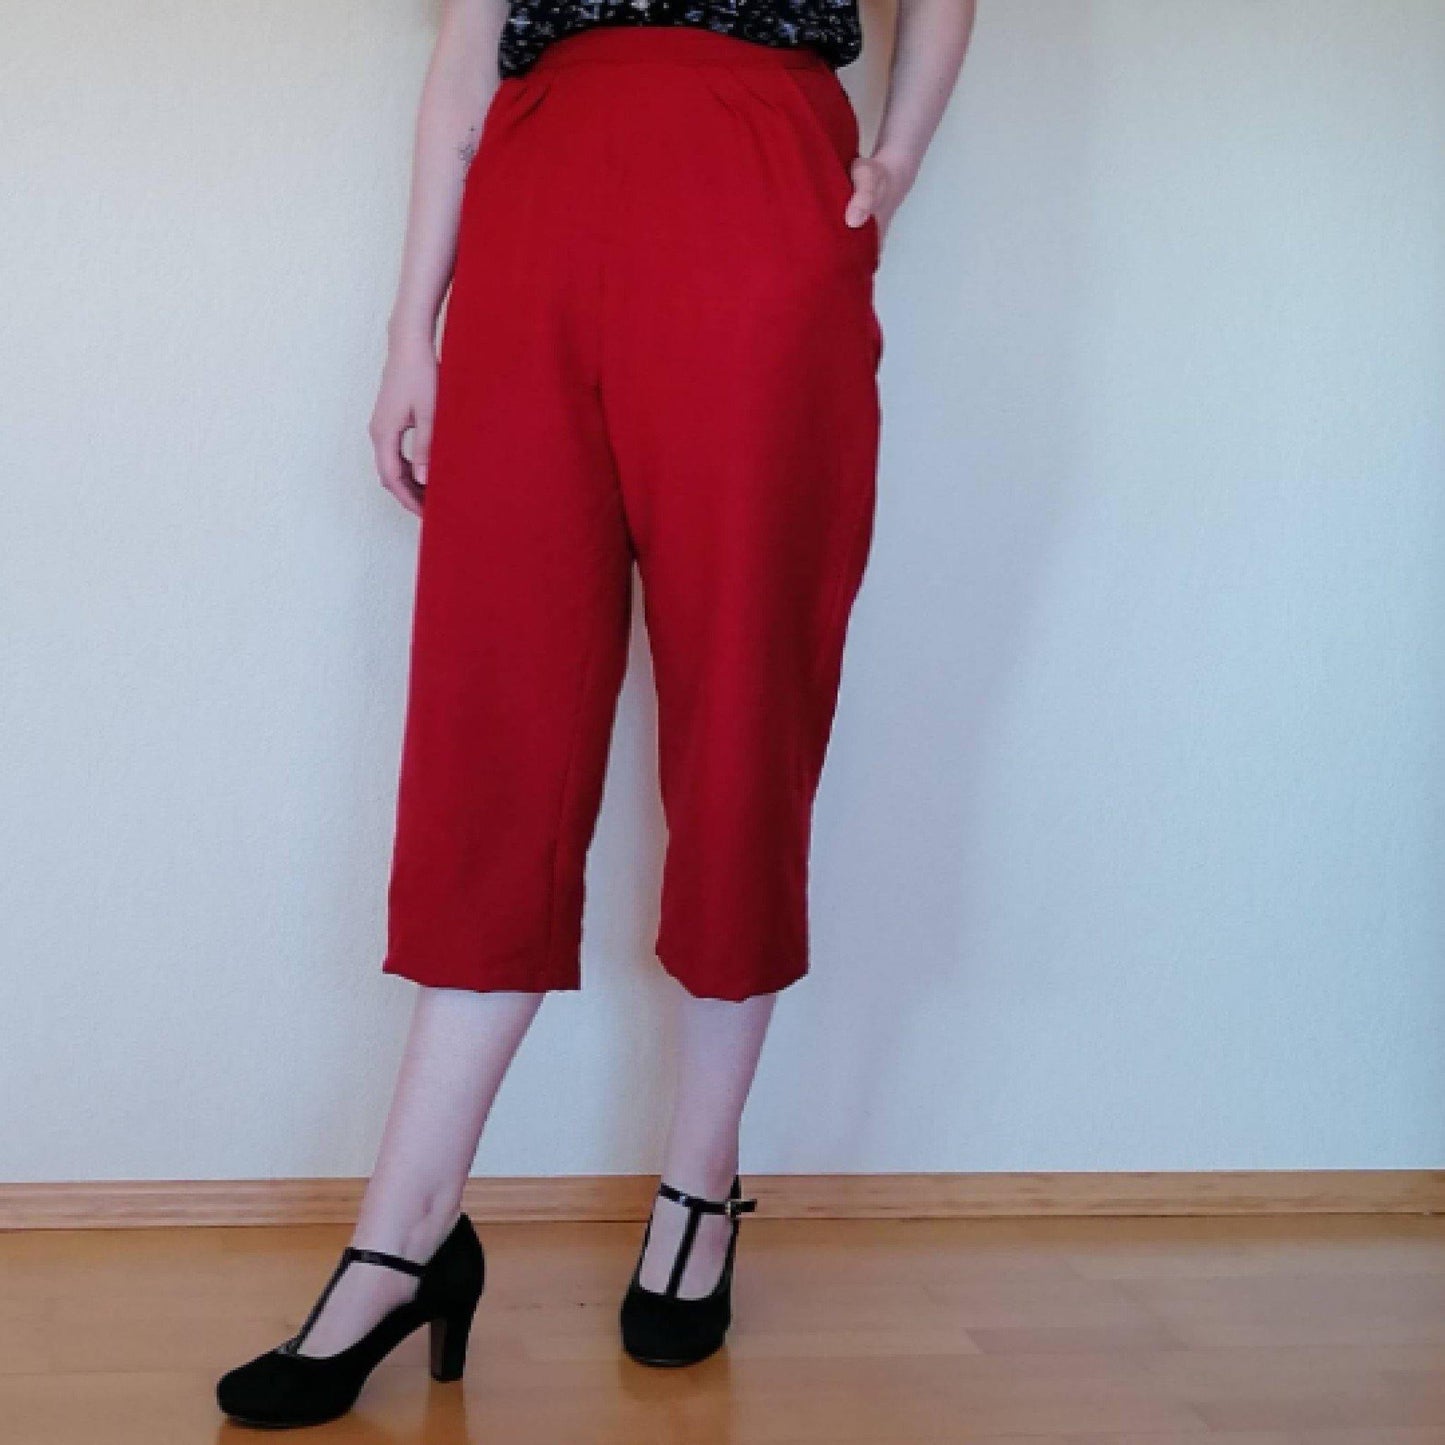 Woman wearing pedal pushers. Centre, front view, wearing cigarette pants. Right, back view, wearing cigarette pants. Made using Butterick 6592 sewing pattern